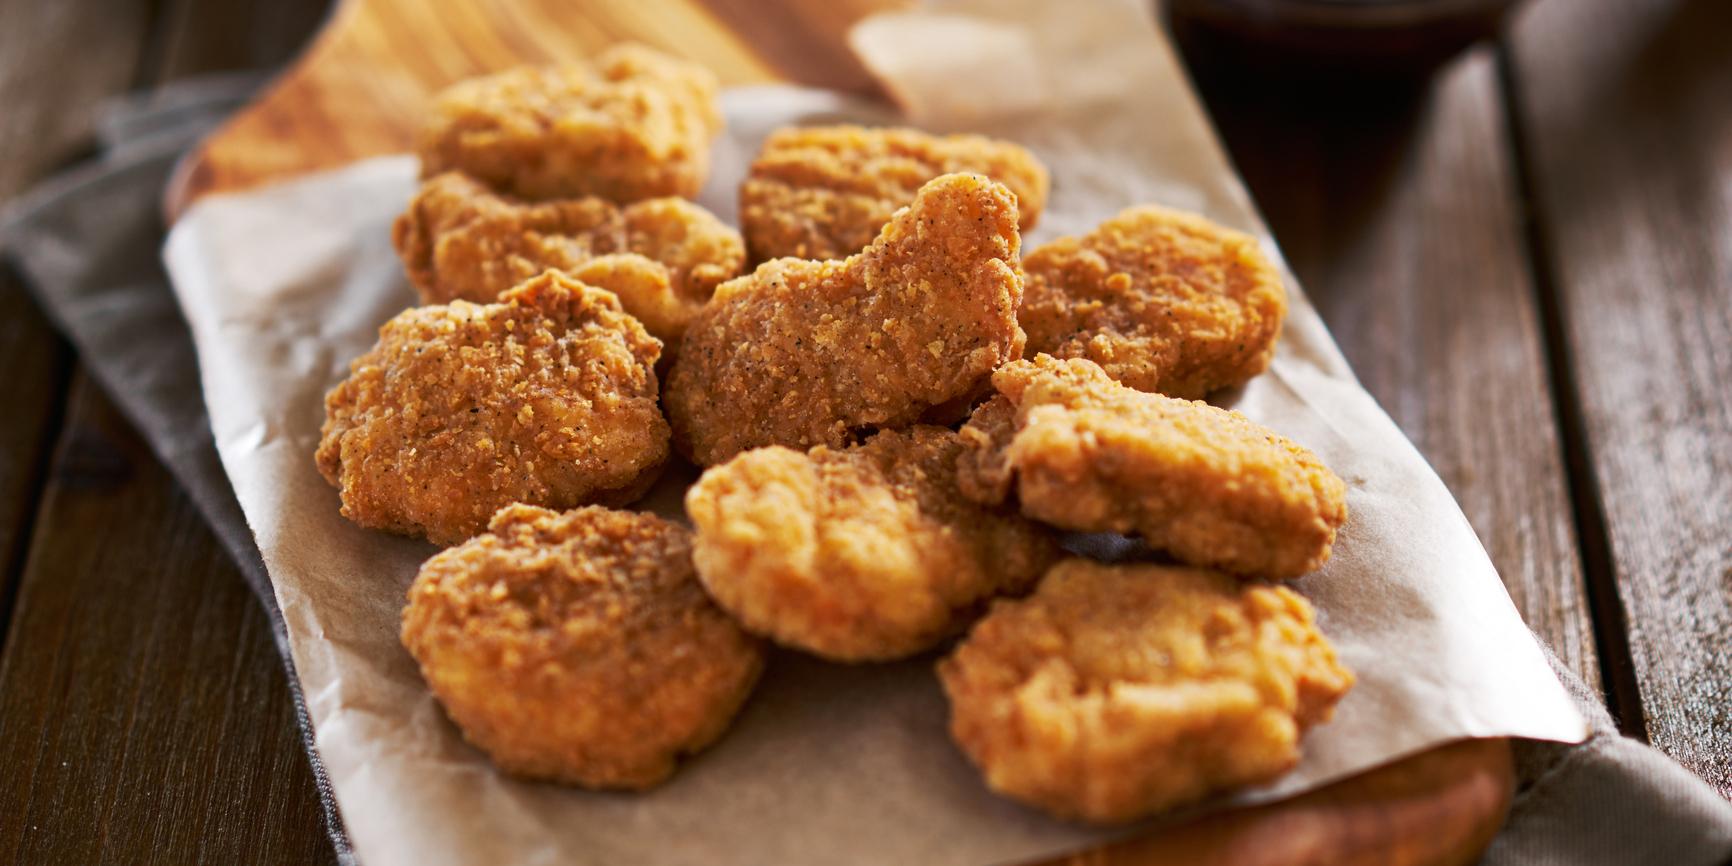 You can now eat chicken nuggets as a job | indy100 | indy100